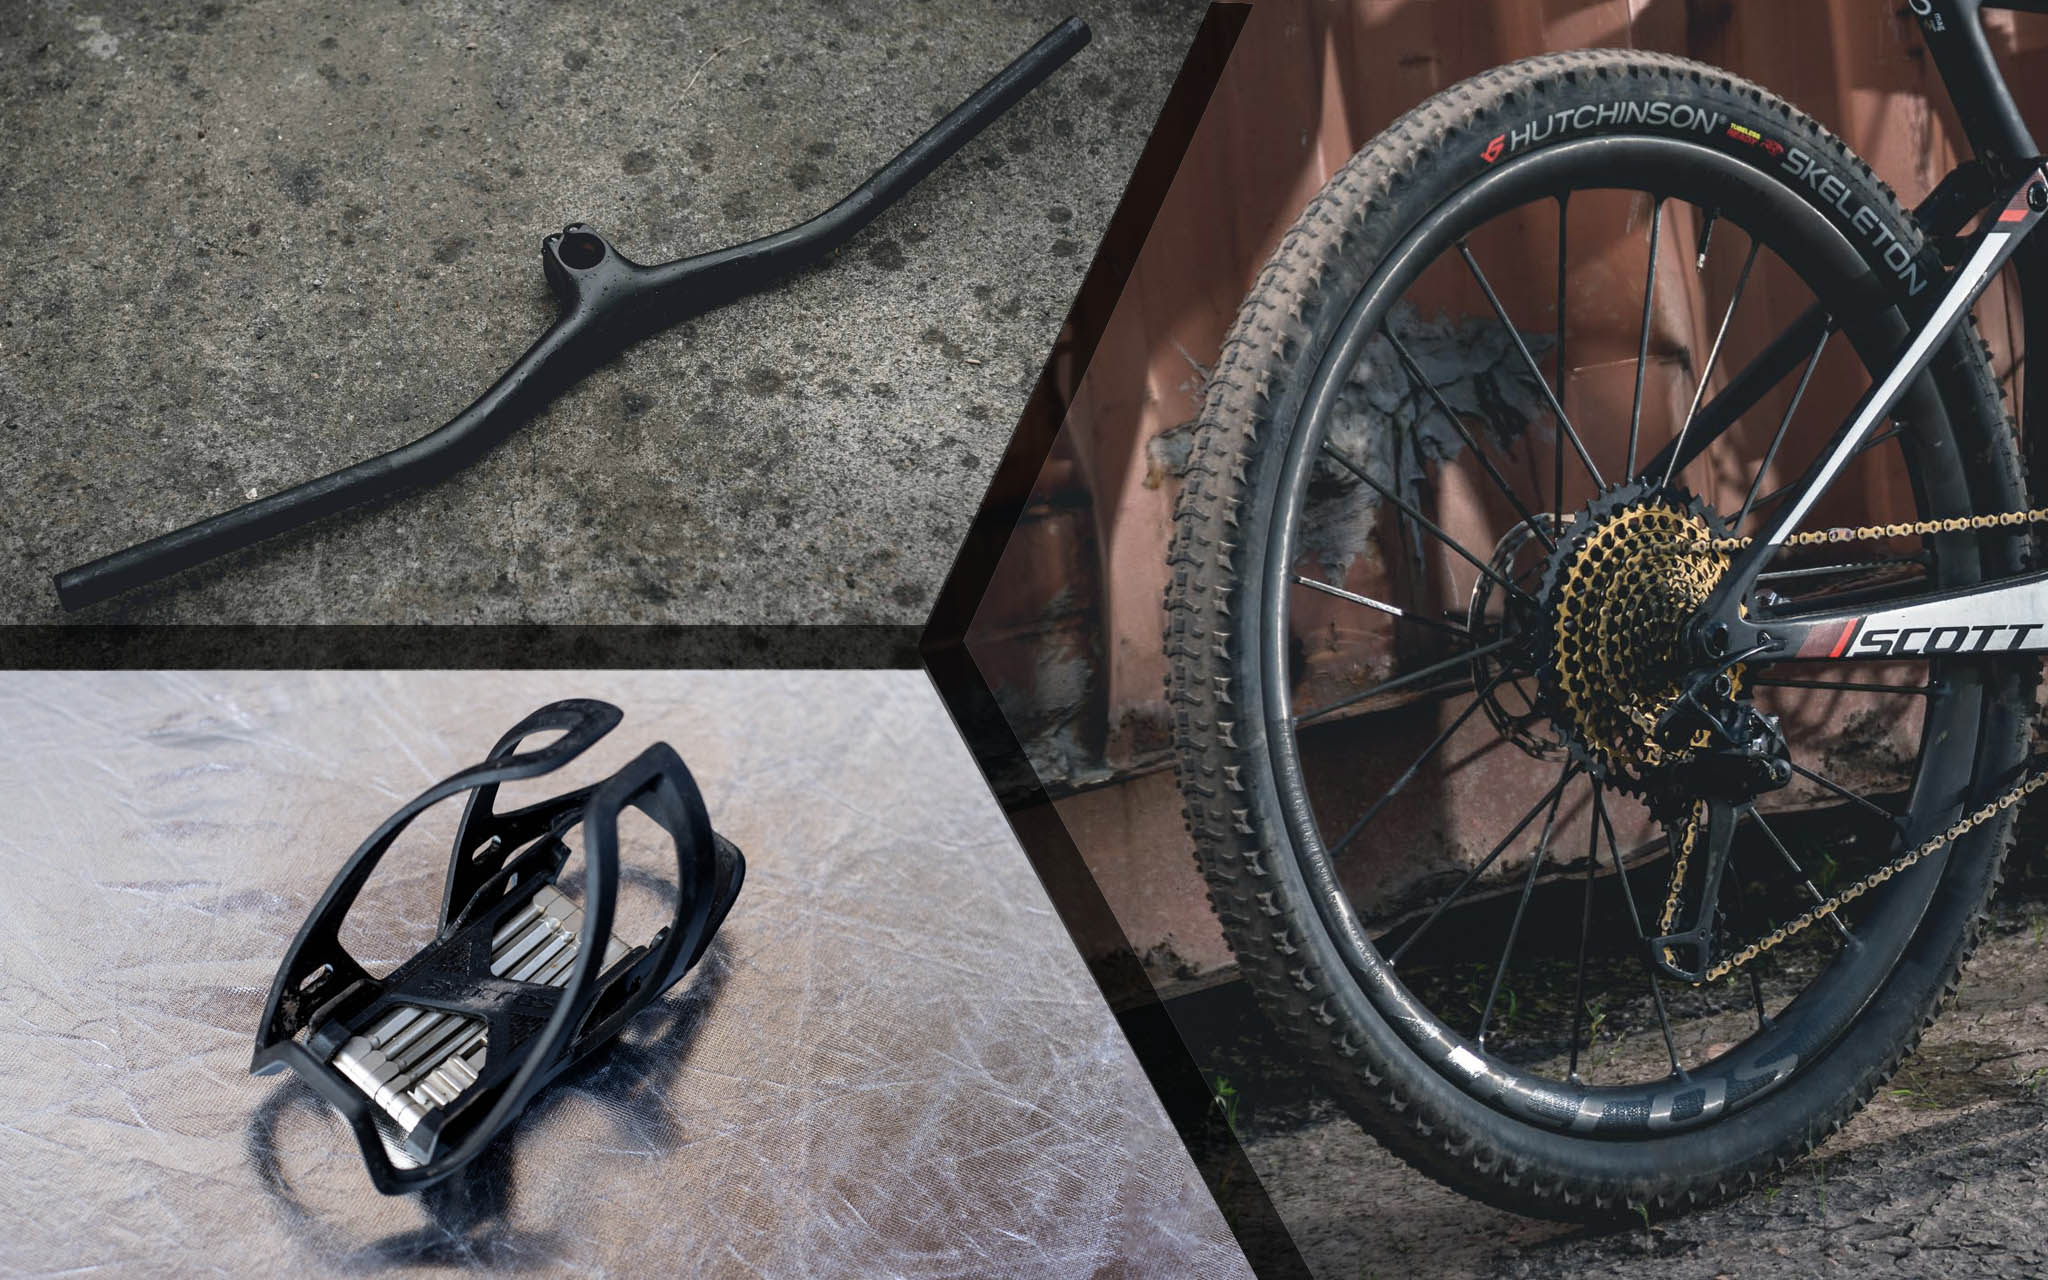 Image d'illustration de l'article : Test ride #15 – Syncros | Roues Silverton SL, cintre Fraser iC SL & Tailor IS Cage